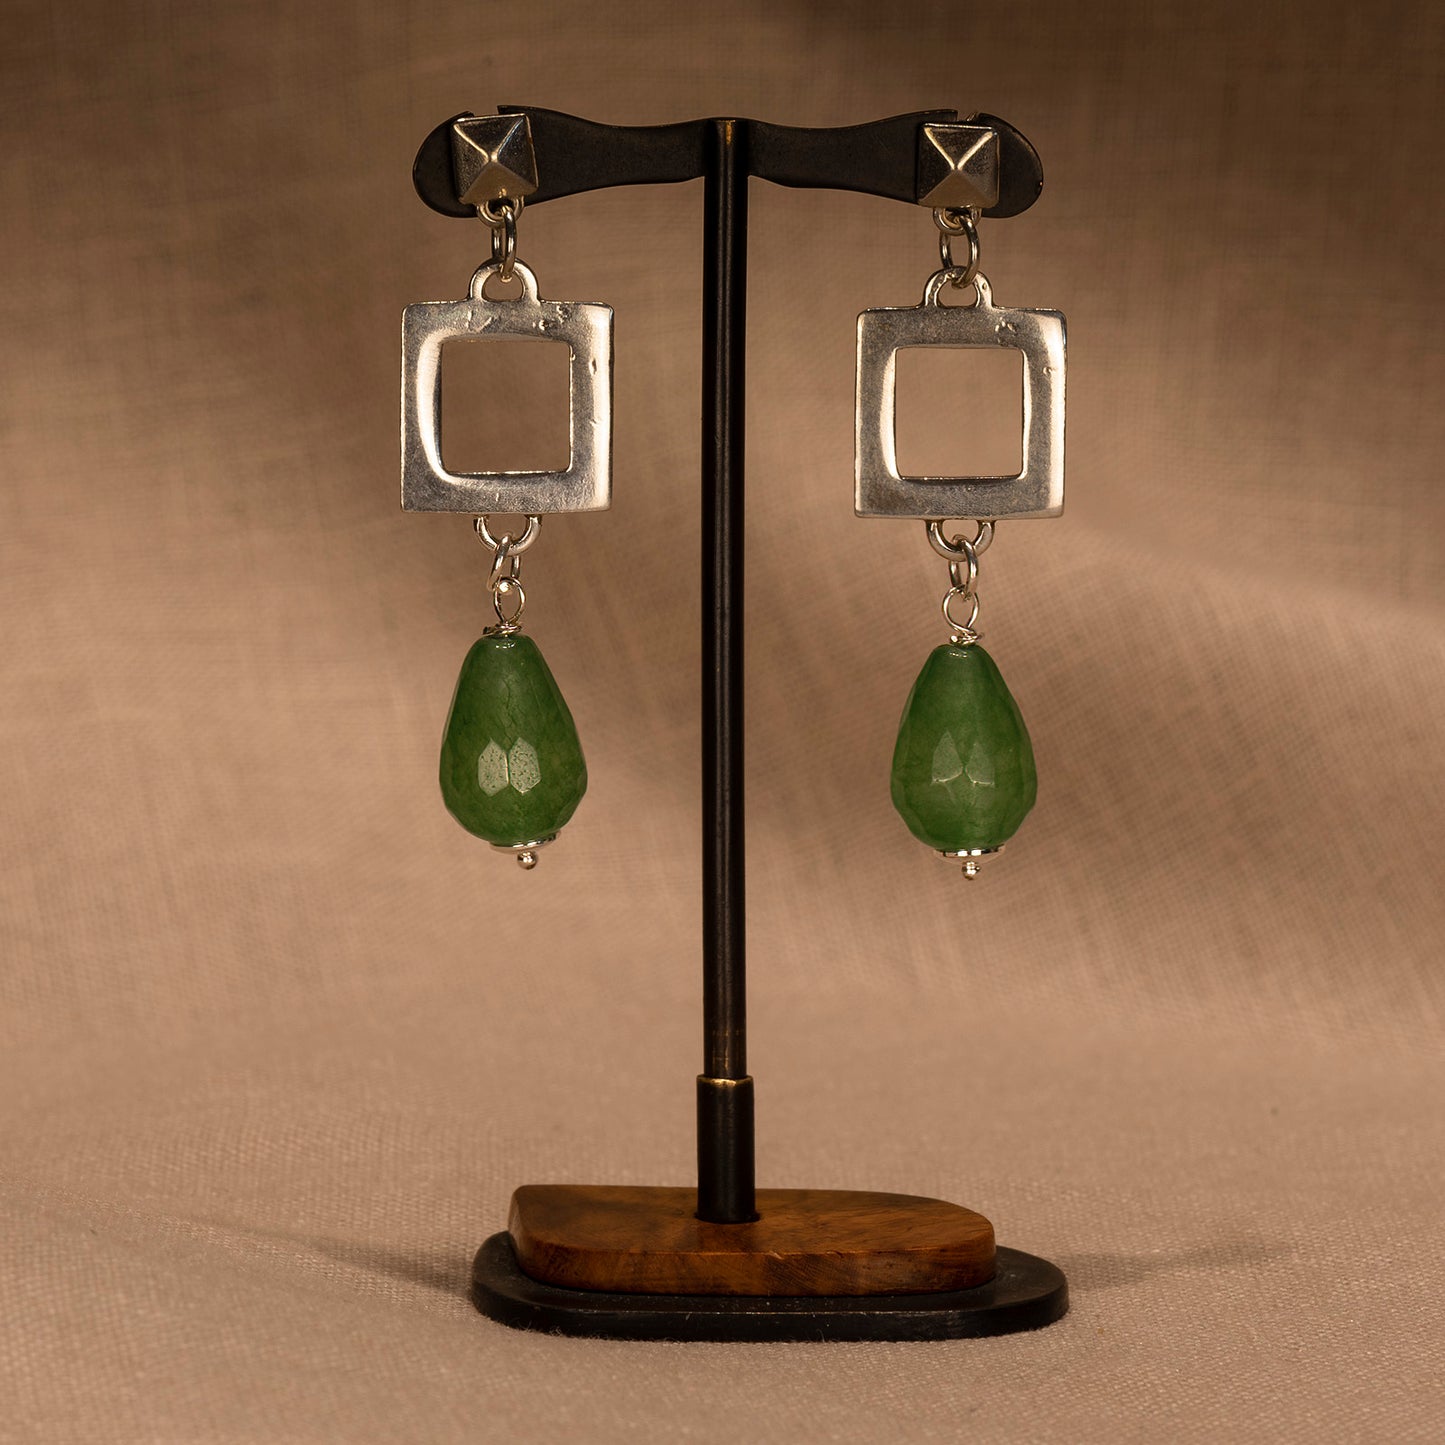 Square sterling silver earrings with green agates